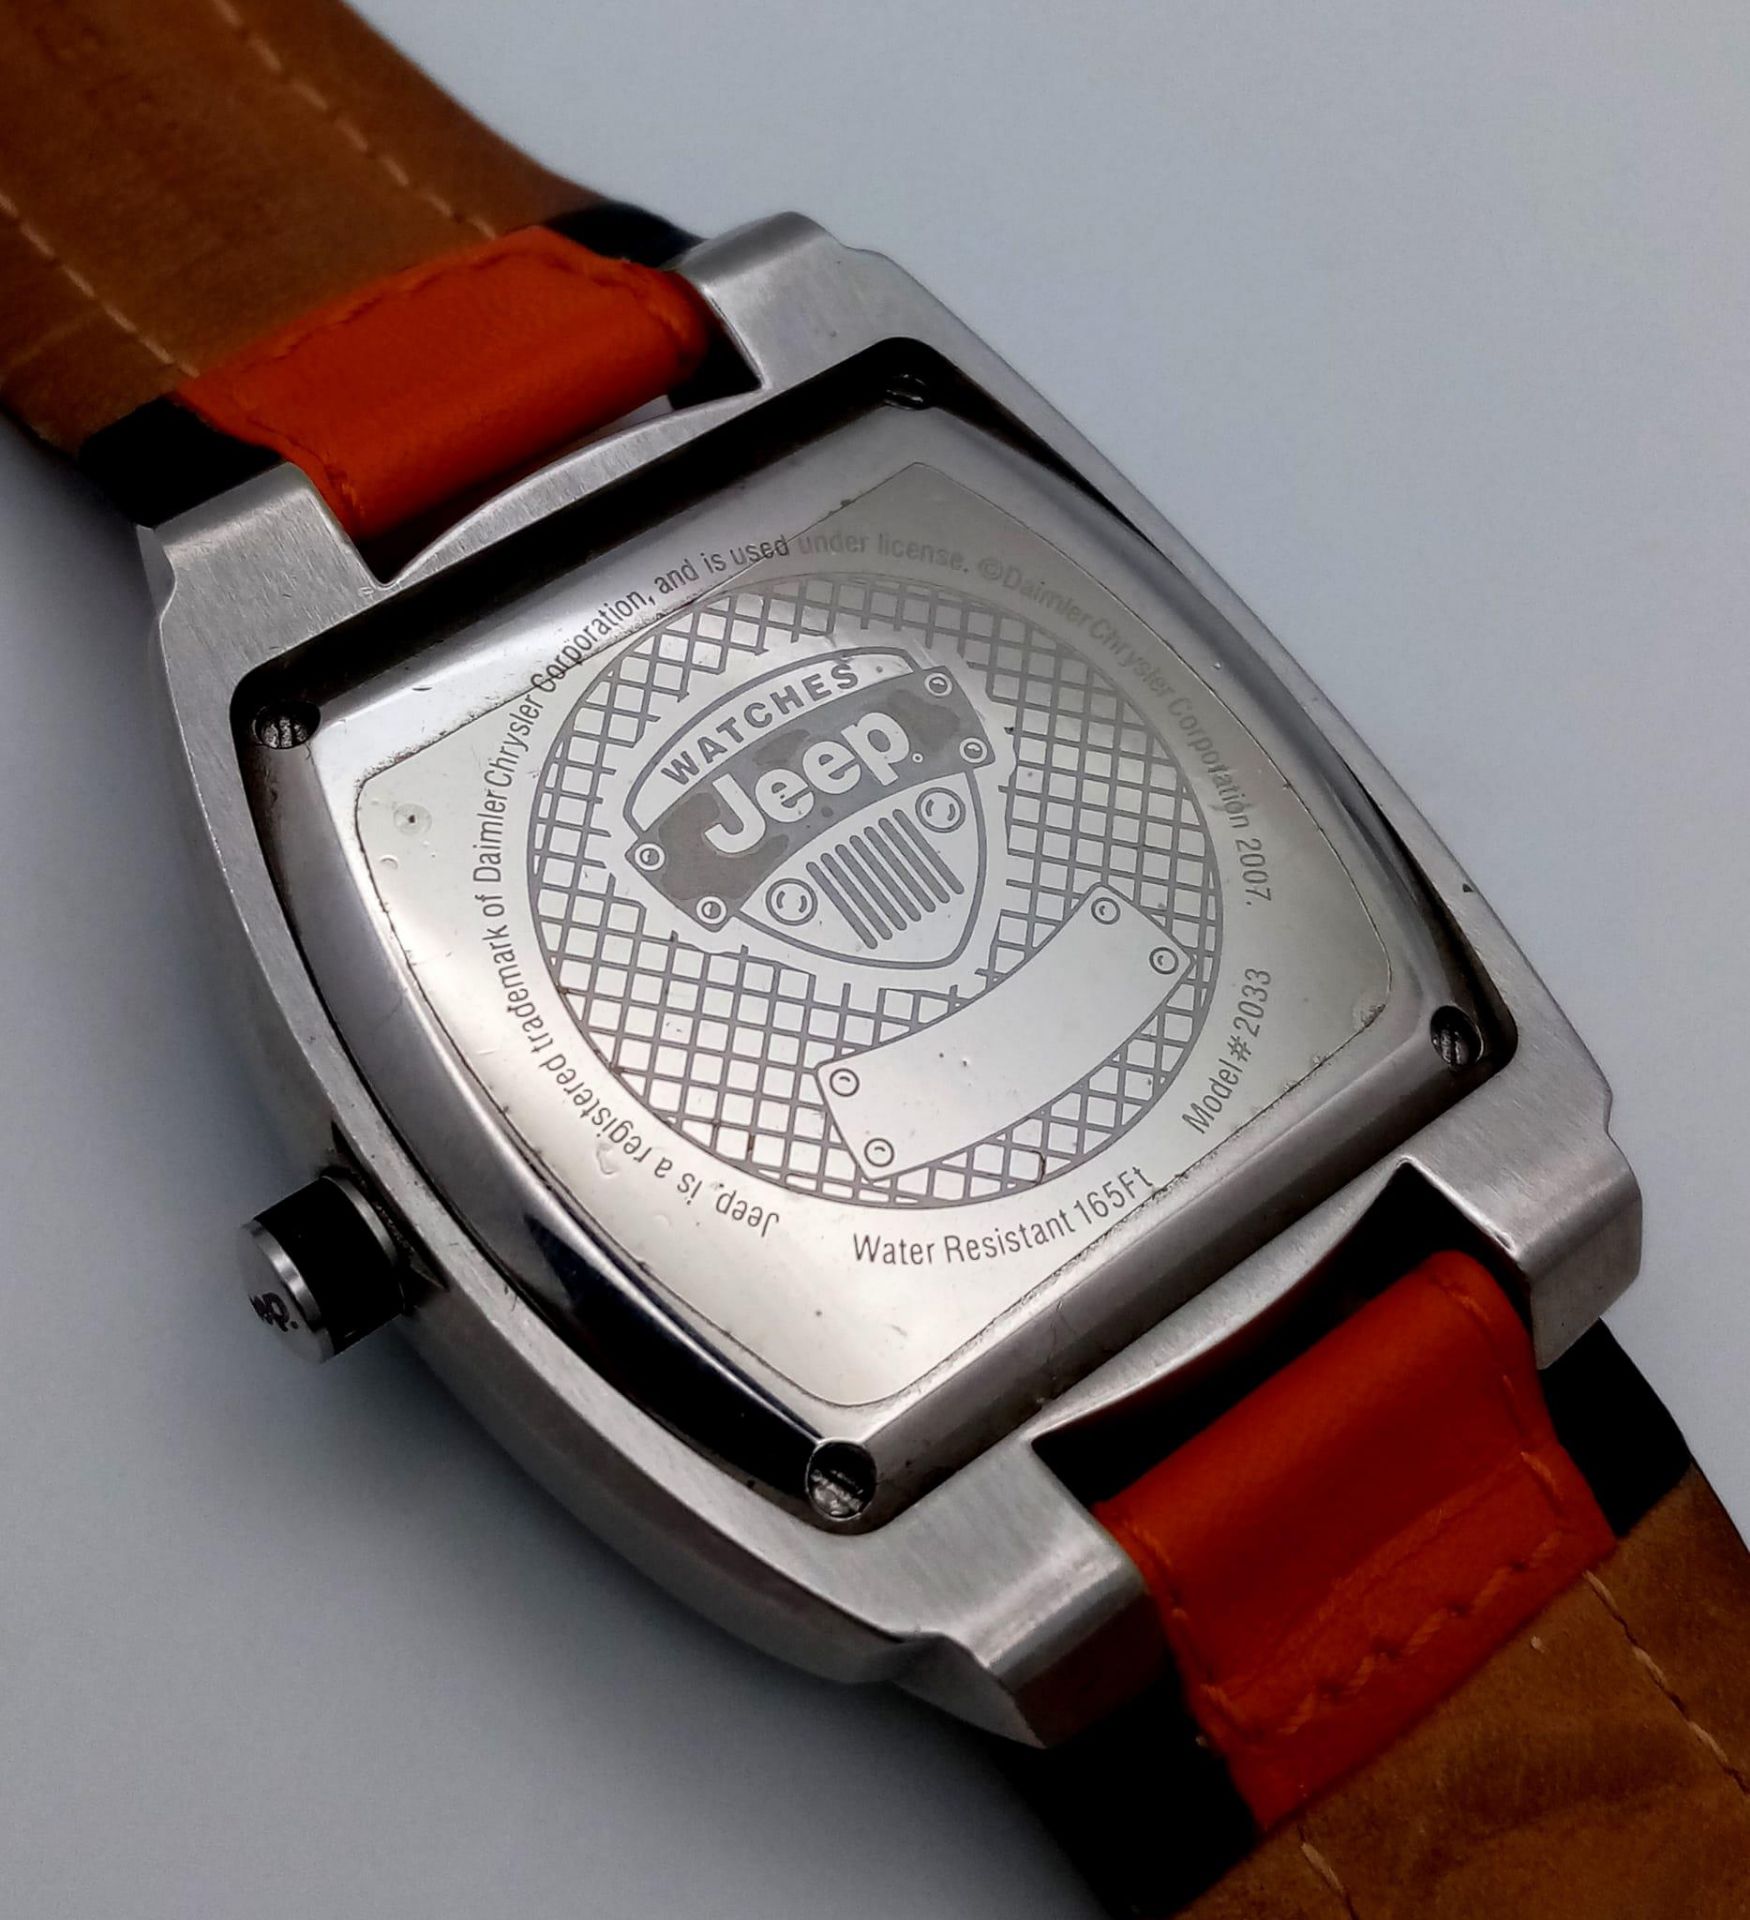 A Jeep Logo Quartz Gents Watch. Orange leather strap. Stainless steel case - 41cm. In good condition - Image 4 of 4